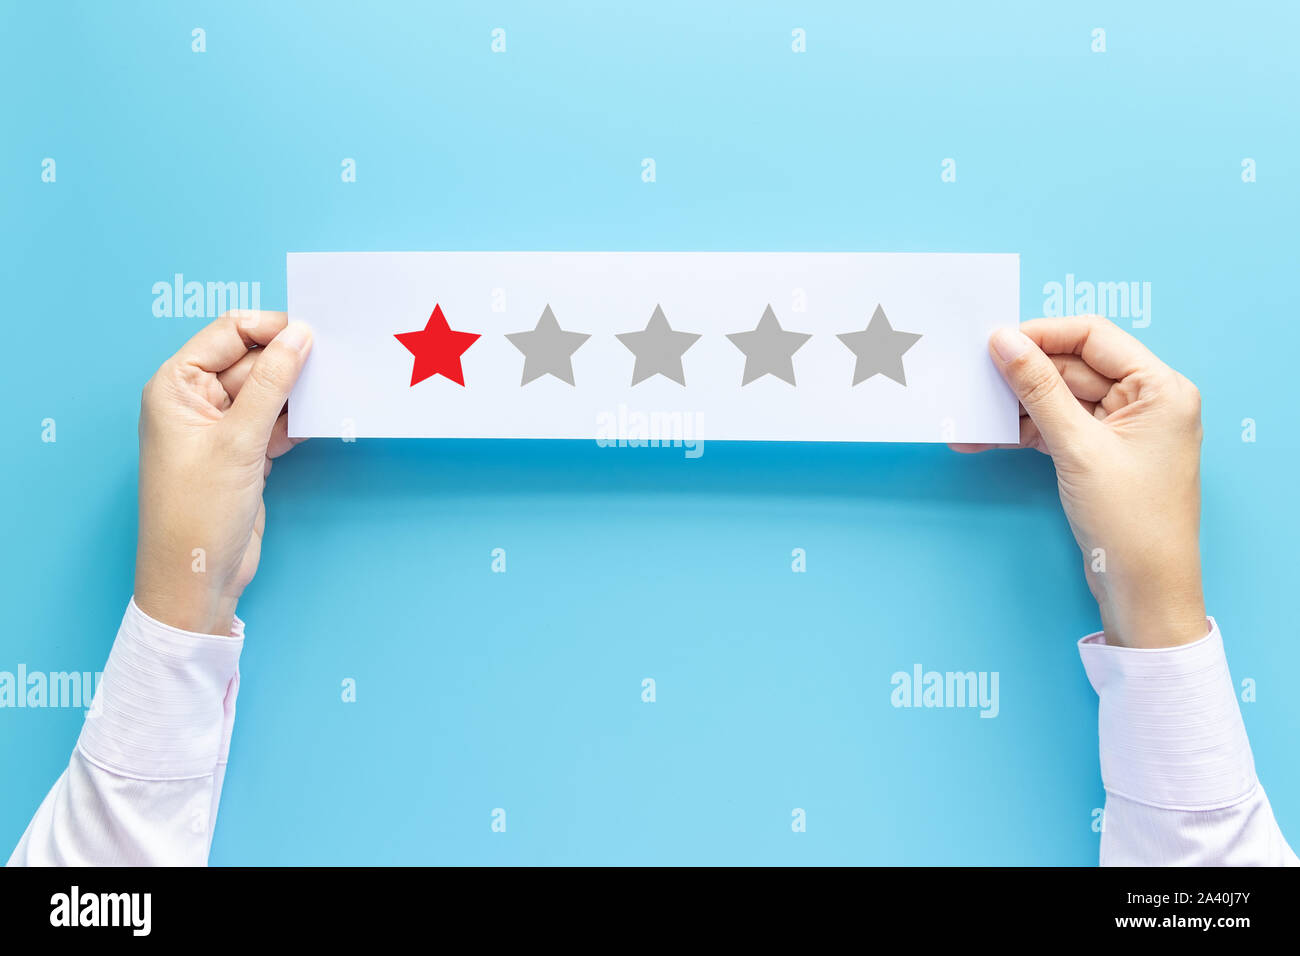 rating and feedback concept. customer holding paper with poor satisfied review by give one star for service experience Stock Photo